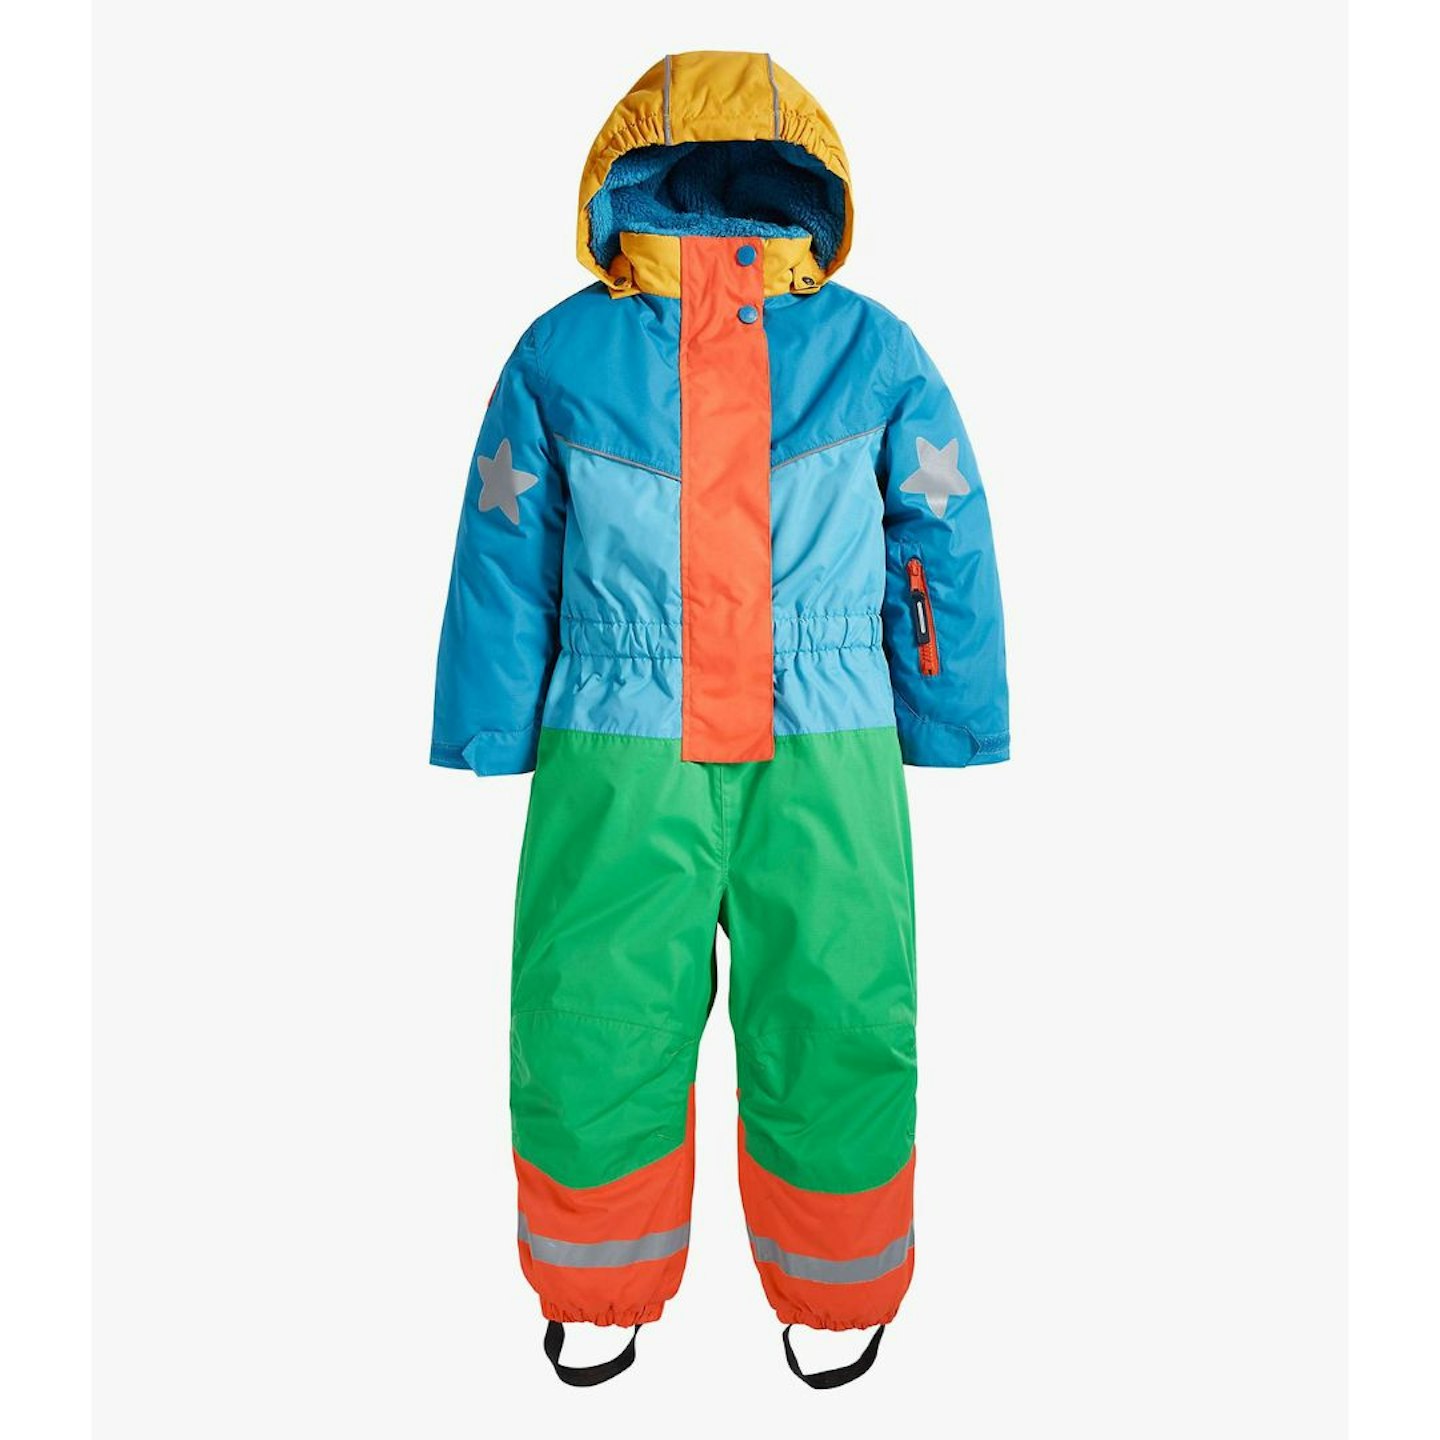 Frugi Kids' Any Weather All-in-One Outwear